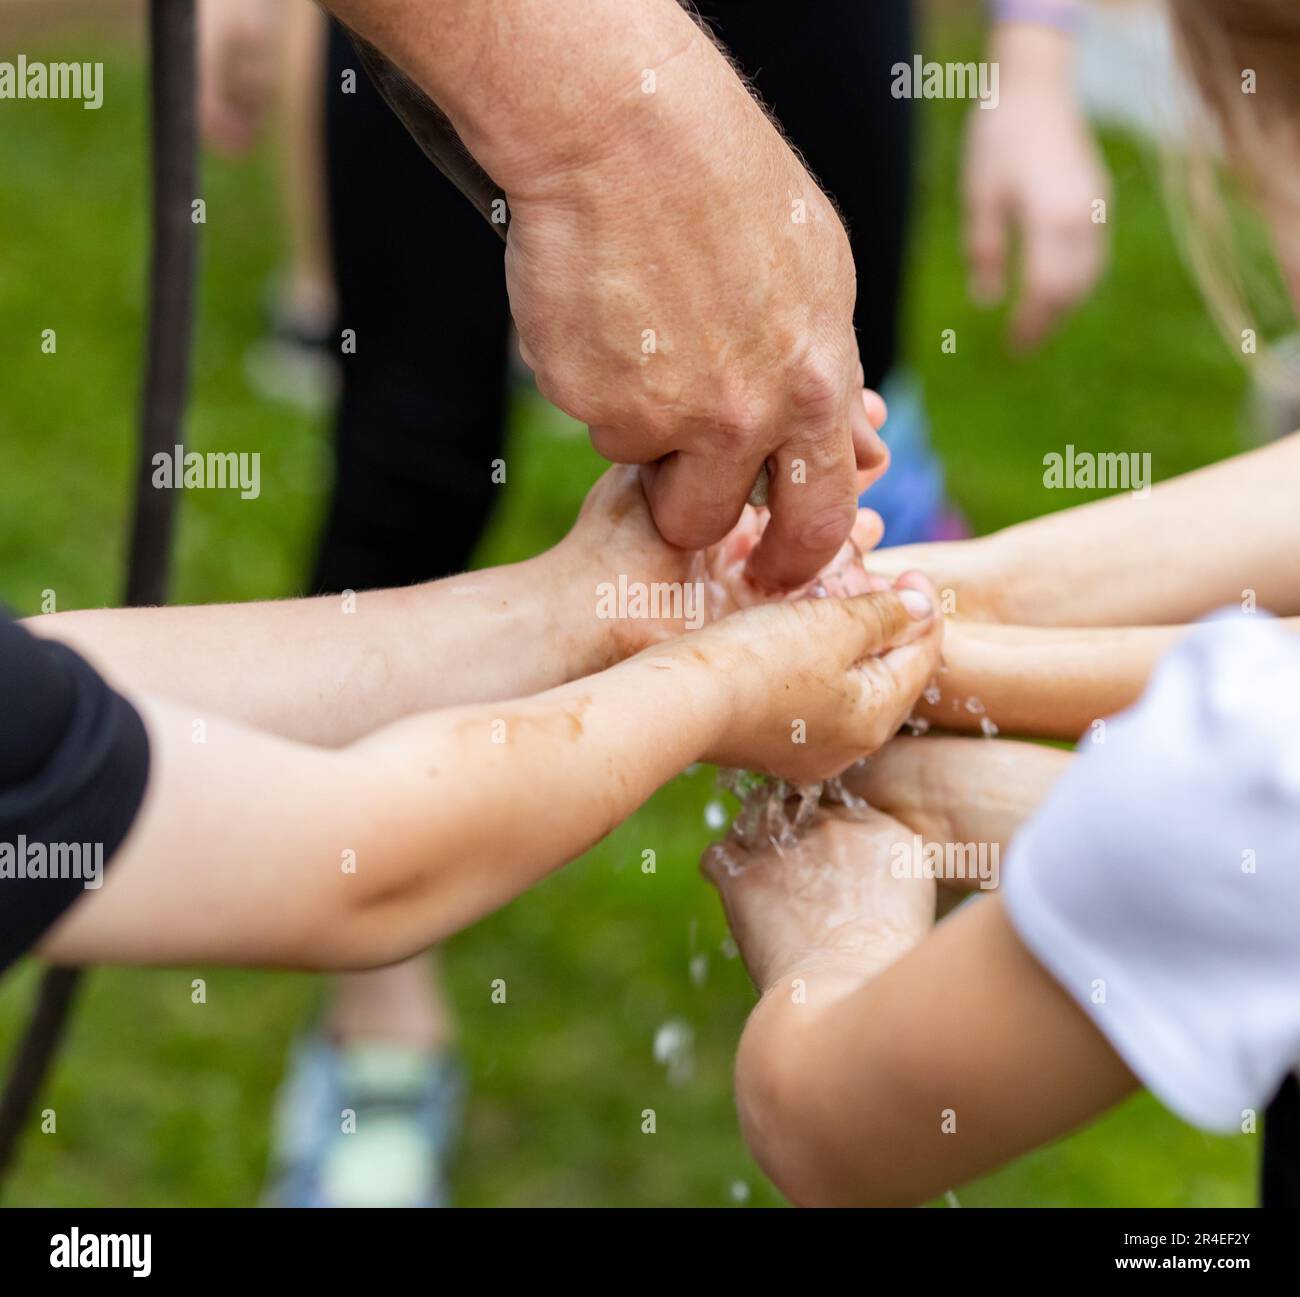 Kids washing hands with water house outdoors Stock Photo